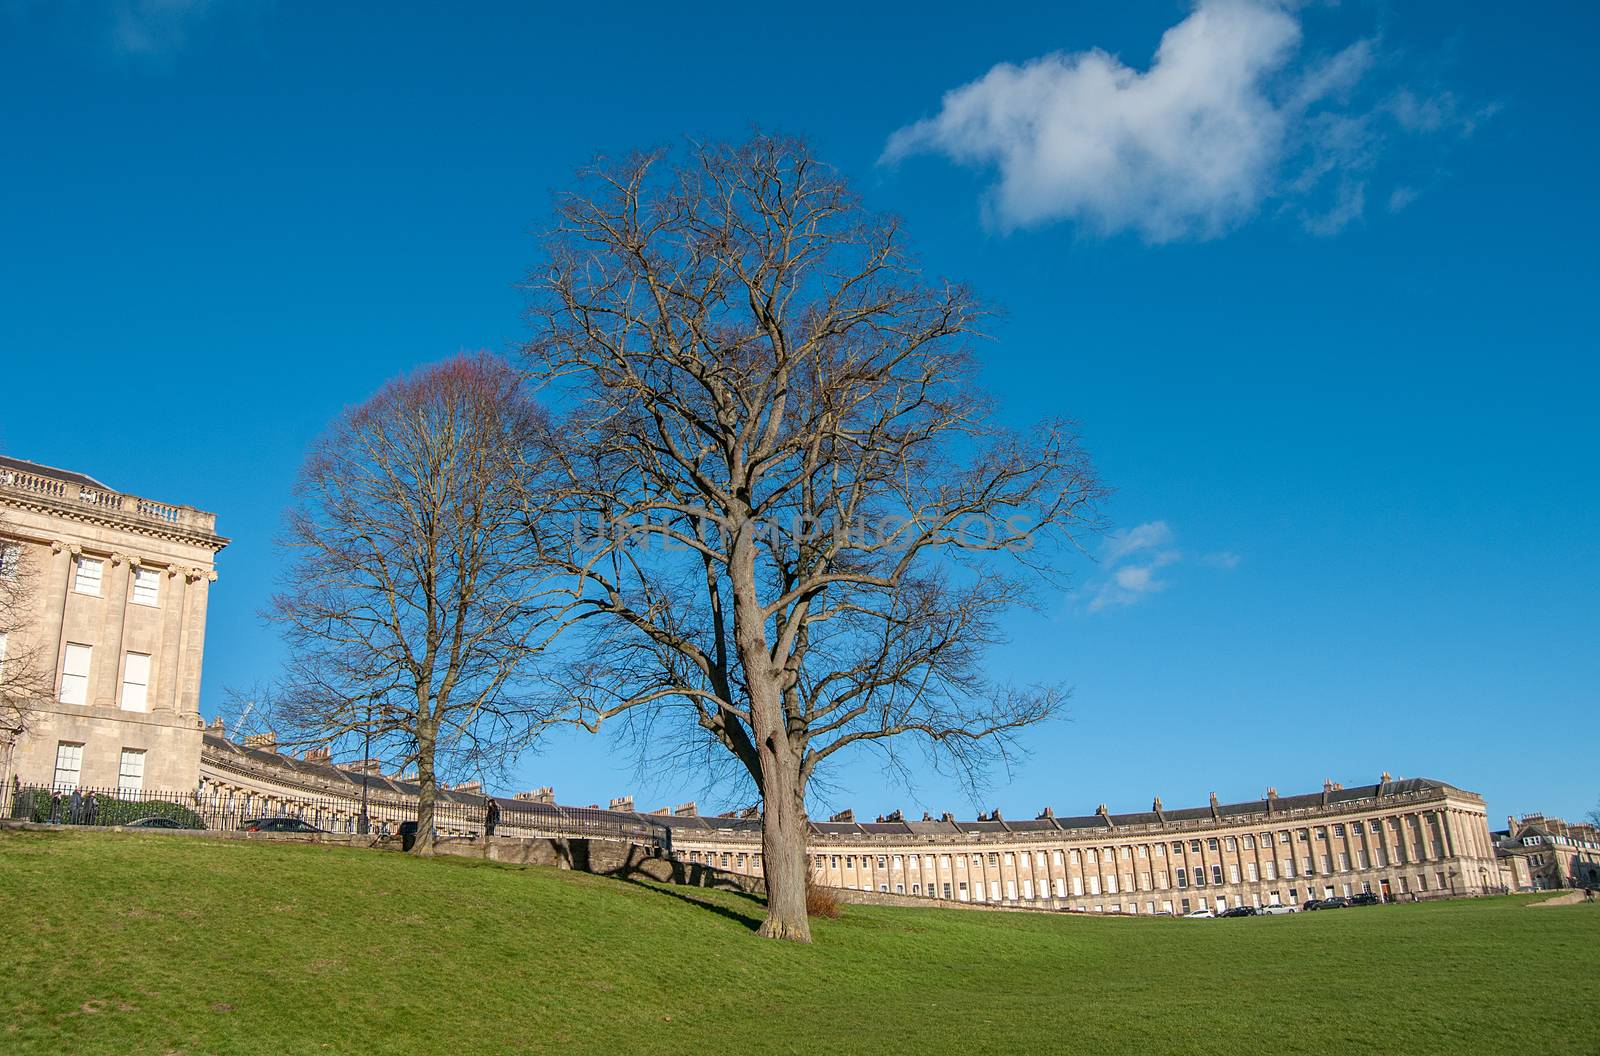 trees at the royal crescent in bath england by sirspread